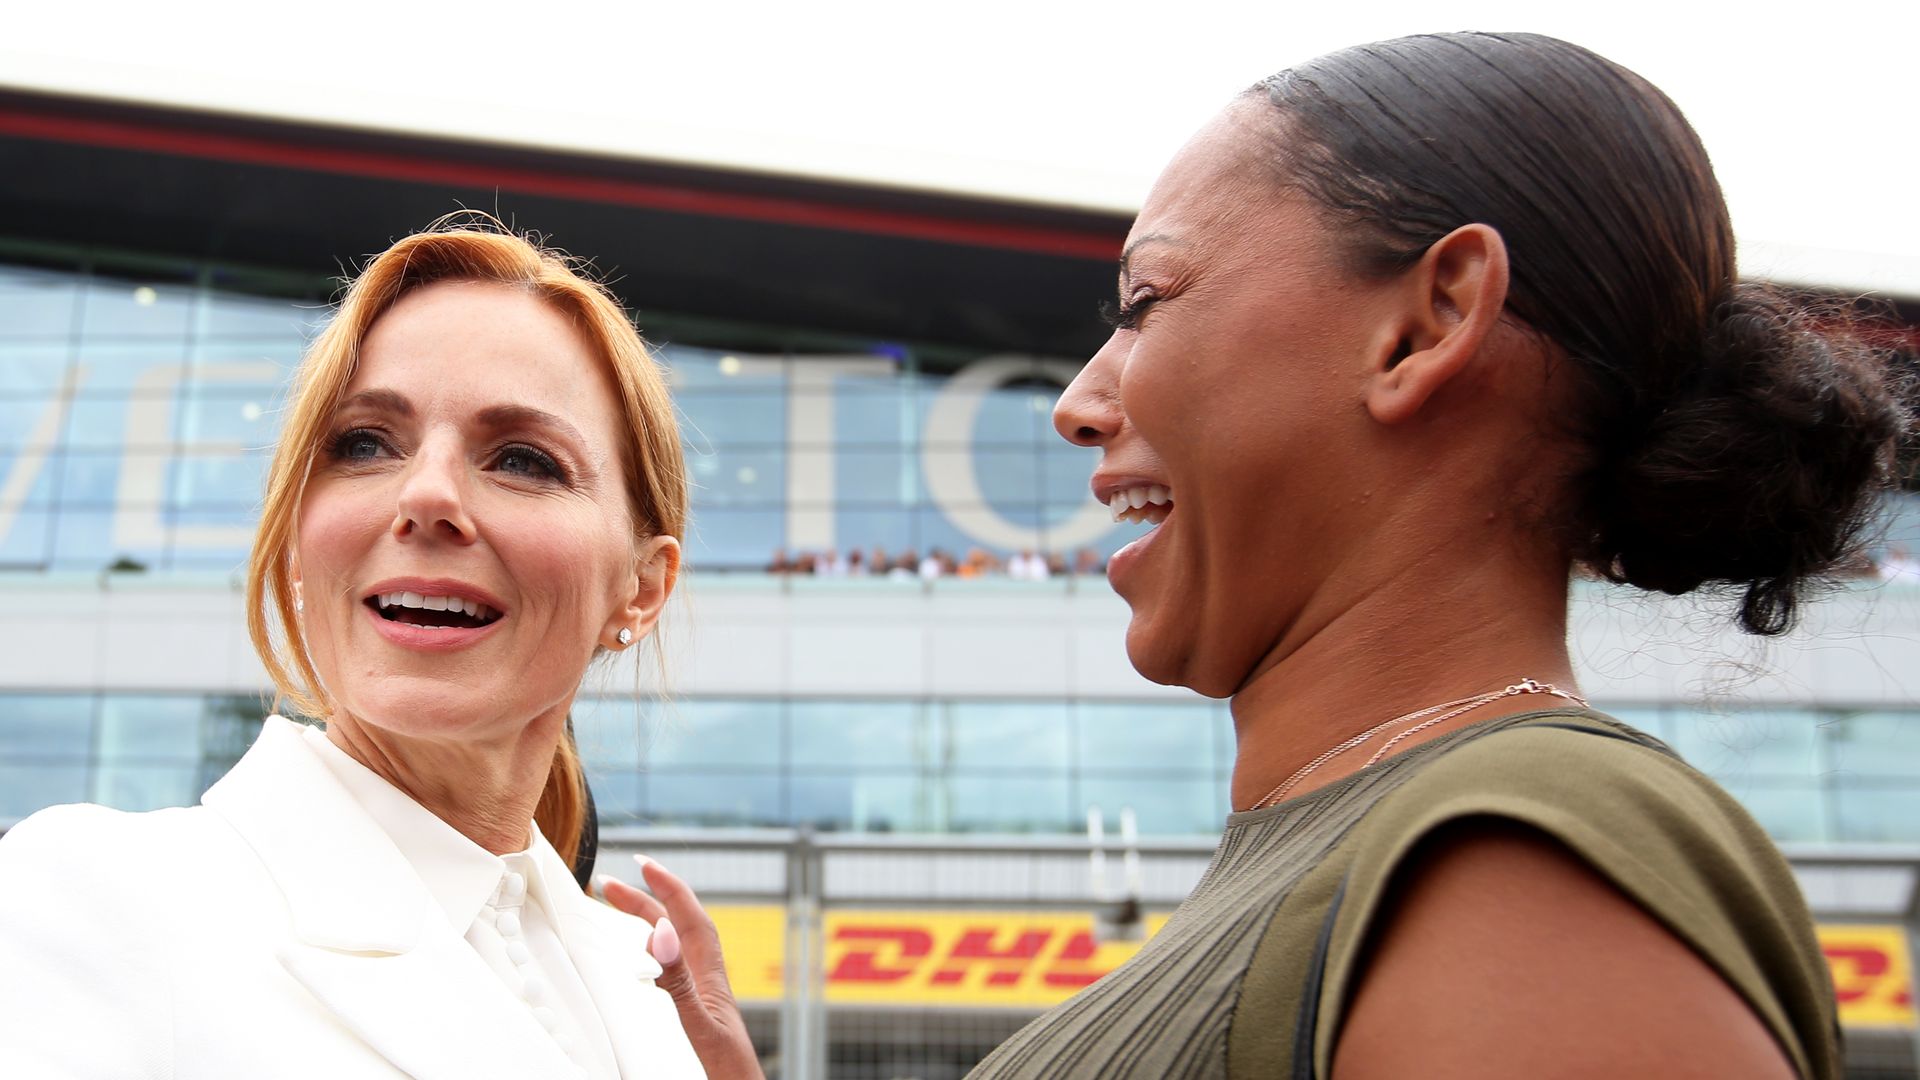 Geri Halliwell-Horner has fans in stitches as she makes epic faux pas in candid message to Mel B